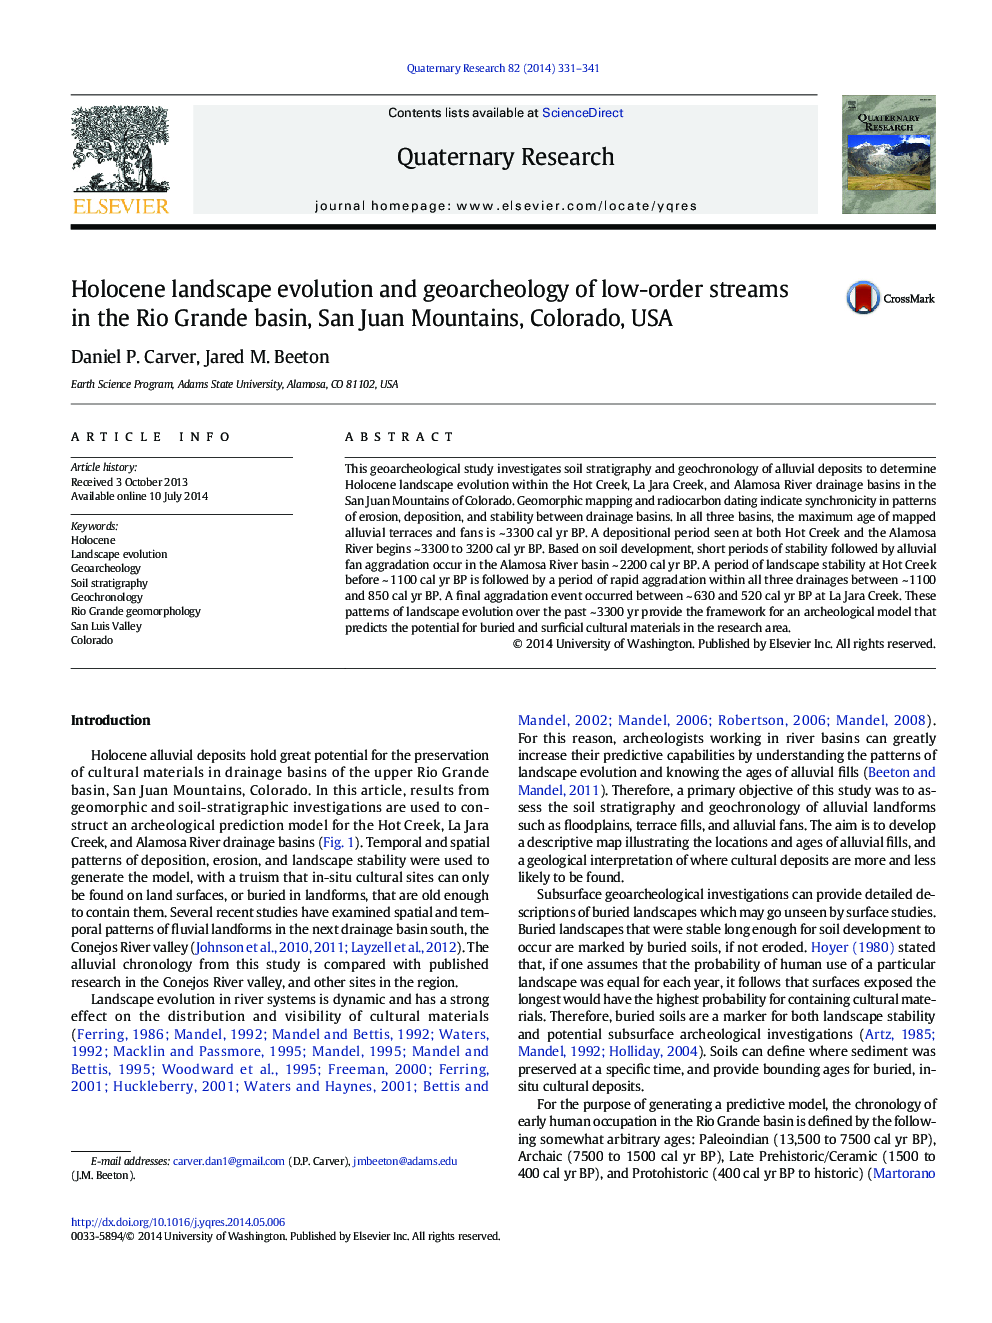 Holocene landscape evolution and geoarcheology of low-order streams in the Rio Grande basin, San Juan Mountains, Colorado, USA